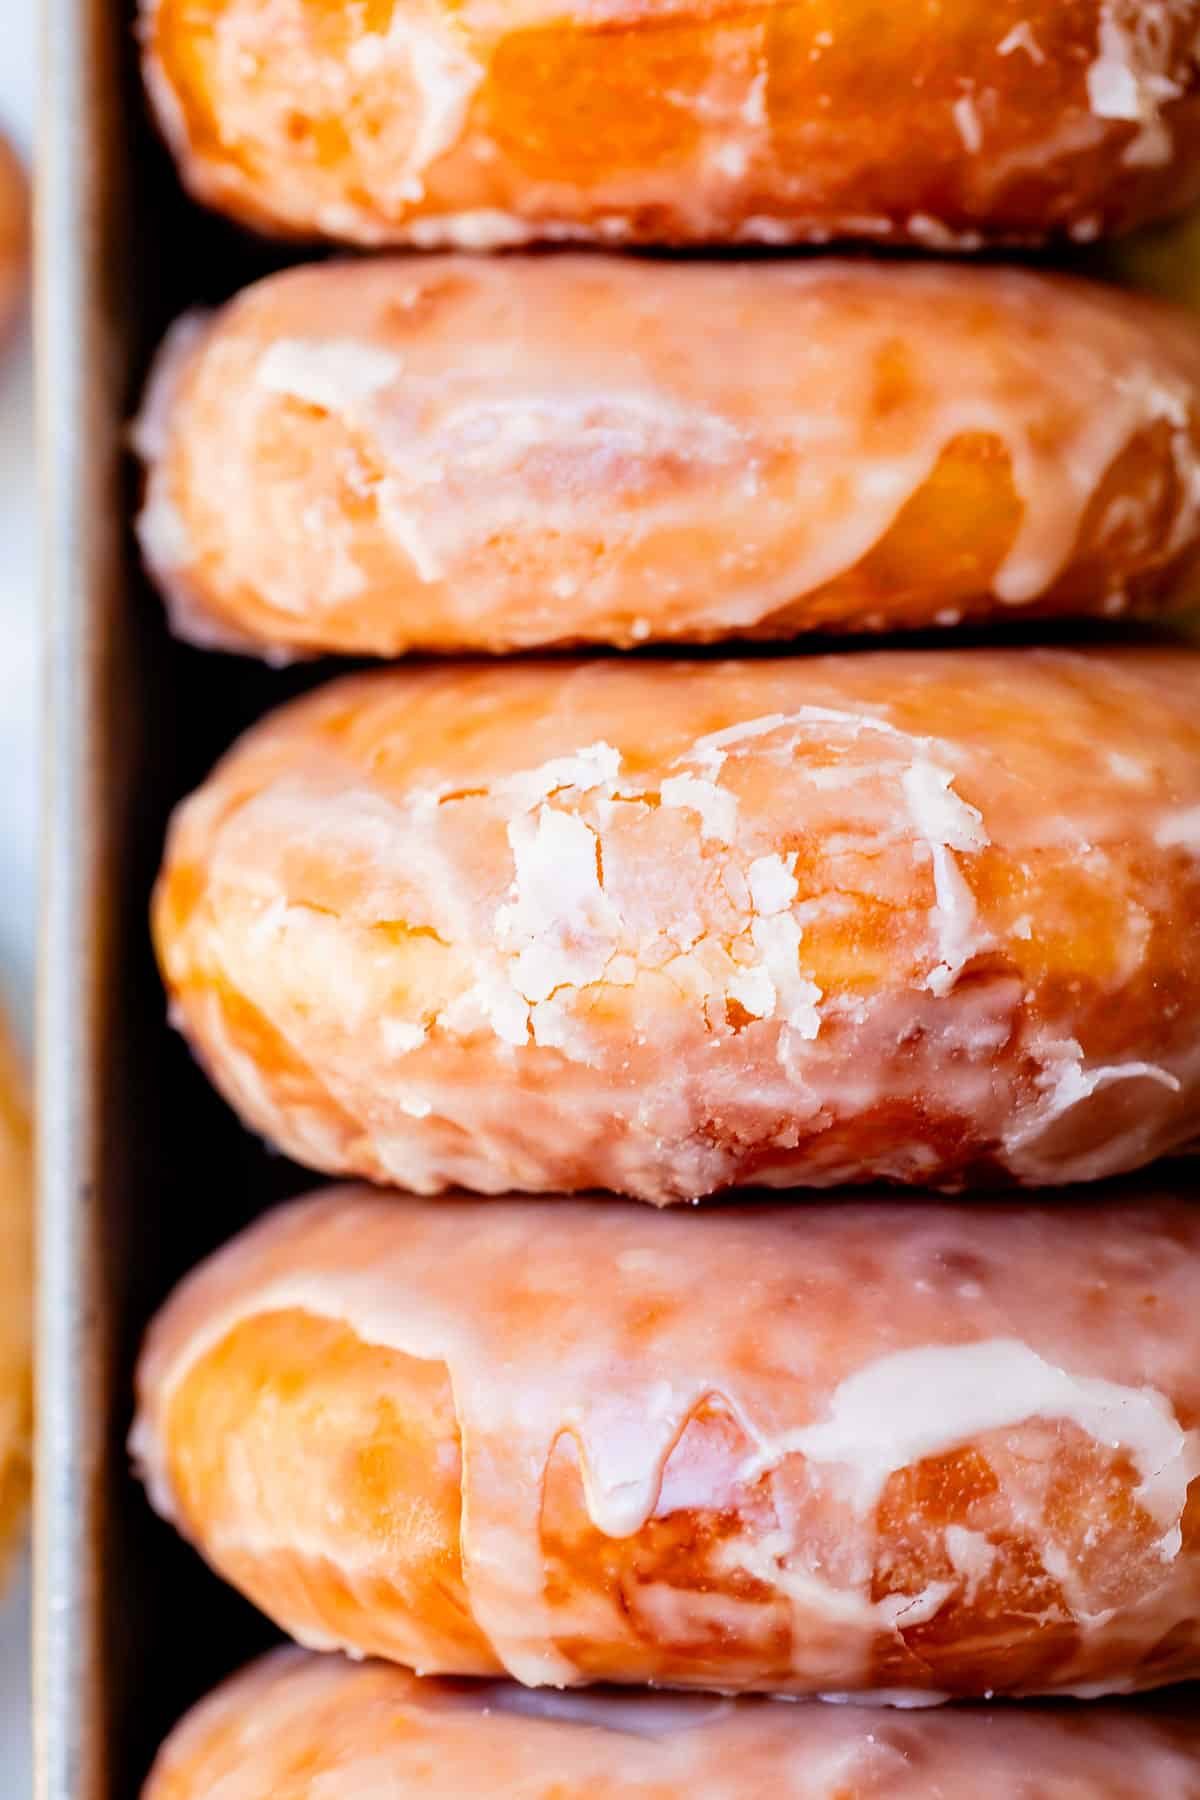 side view of a stack of the best donuts showing the cracks of the glaze.